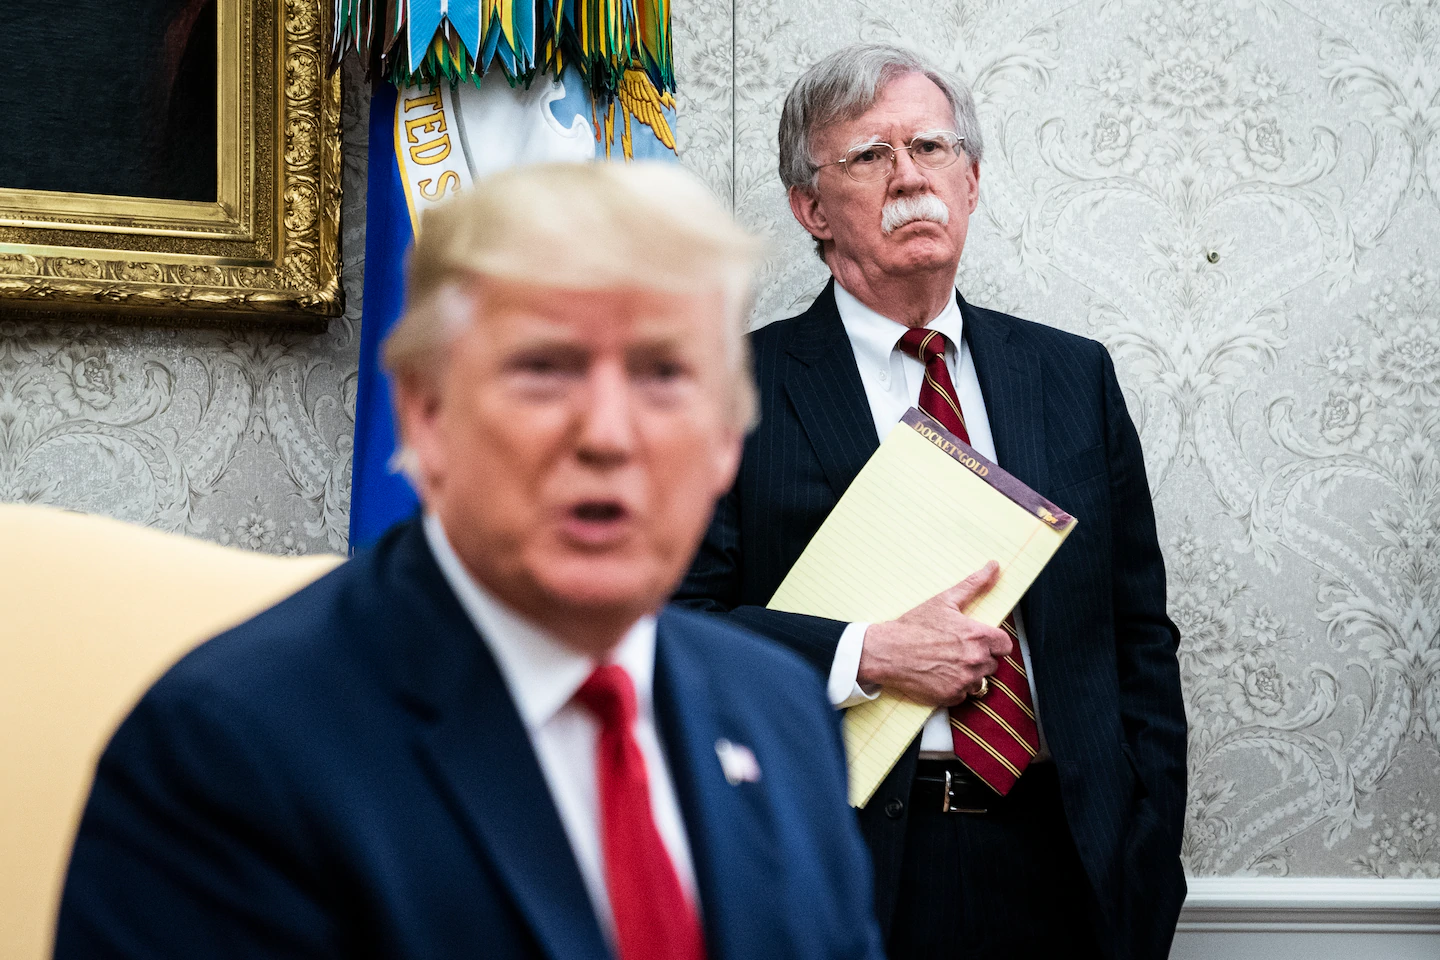 U.S. judge declines to block release of book by former national security adviser John Bolton